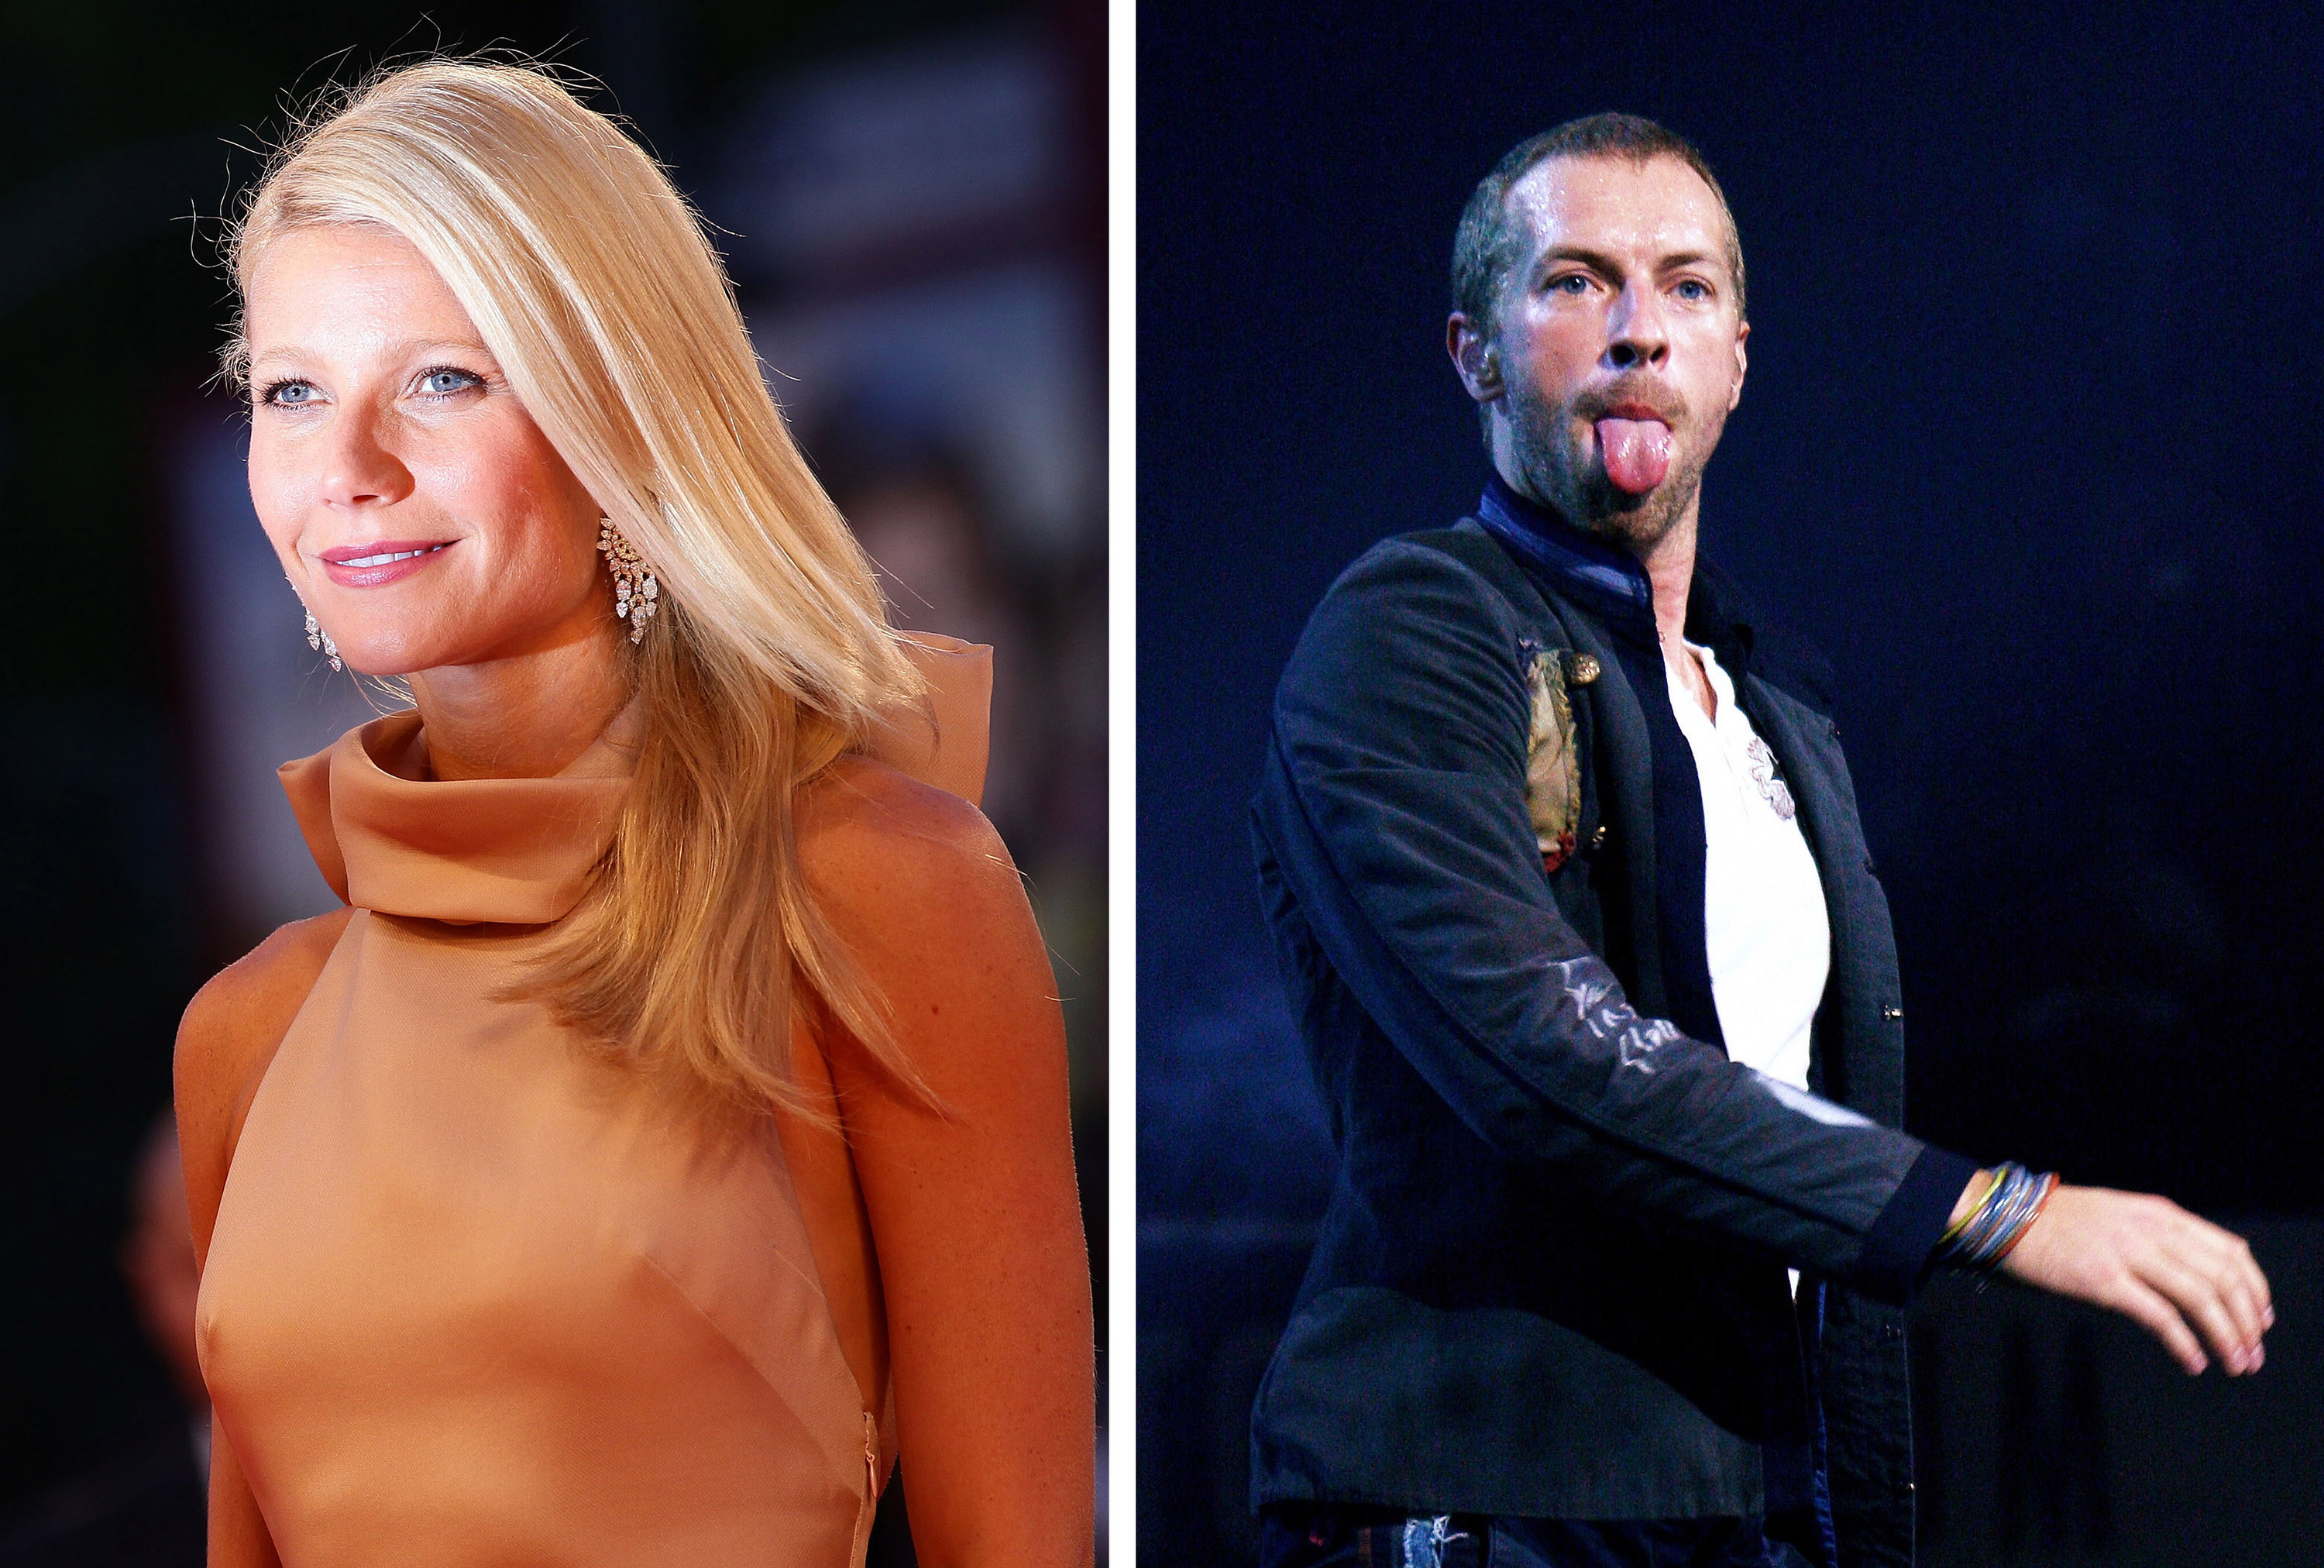 Gwyneth Paltrow in an orange turtleneck and Chris Martin sticking his tongue out at the camera